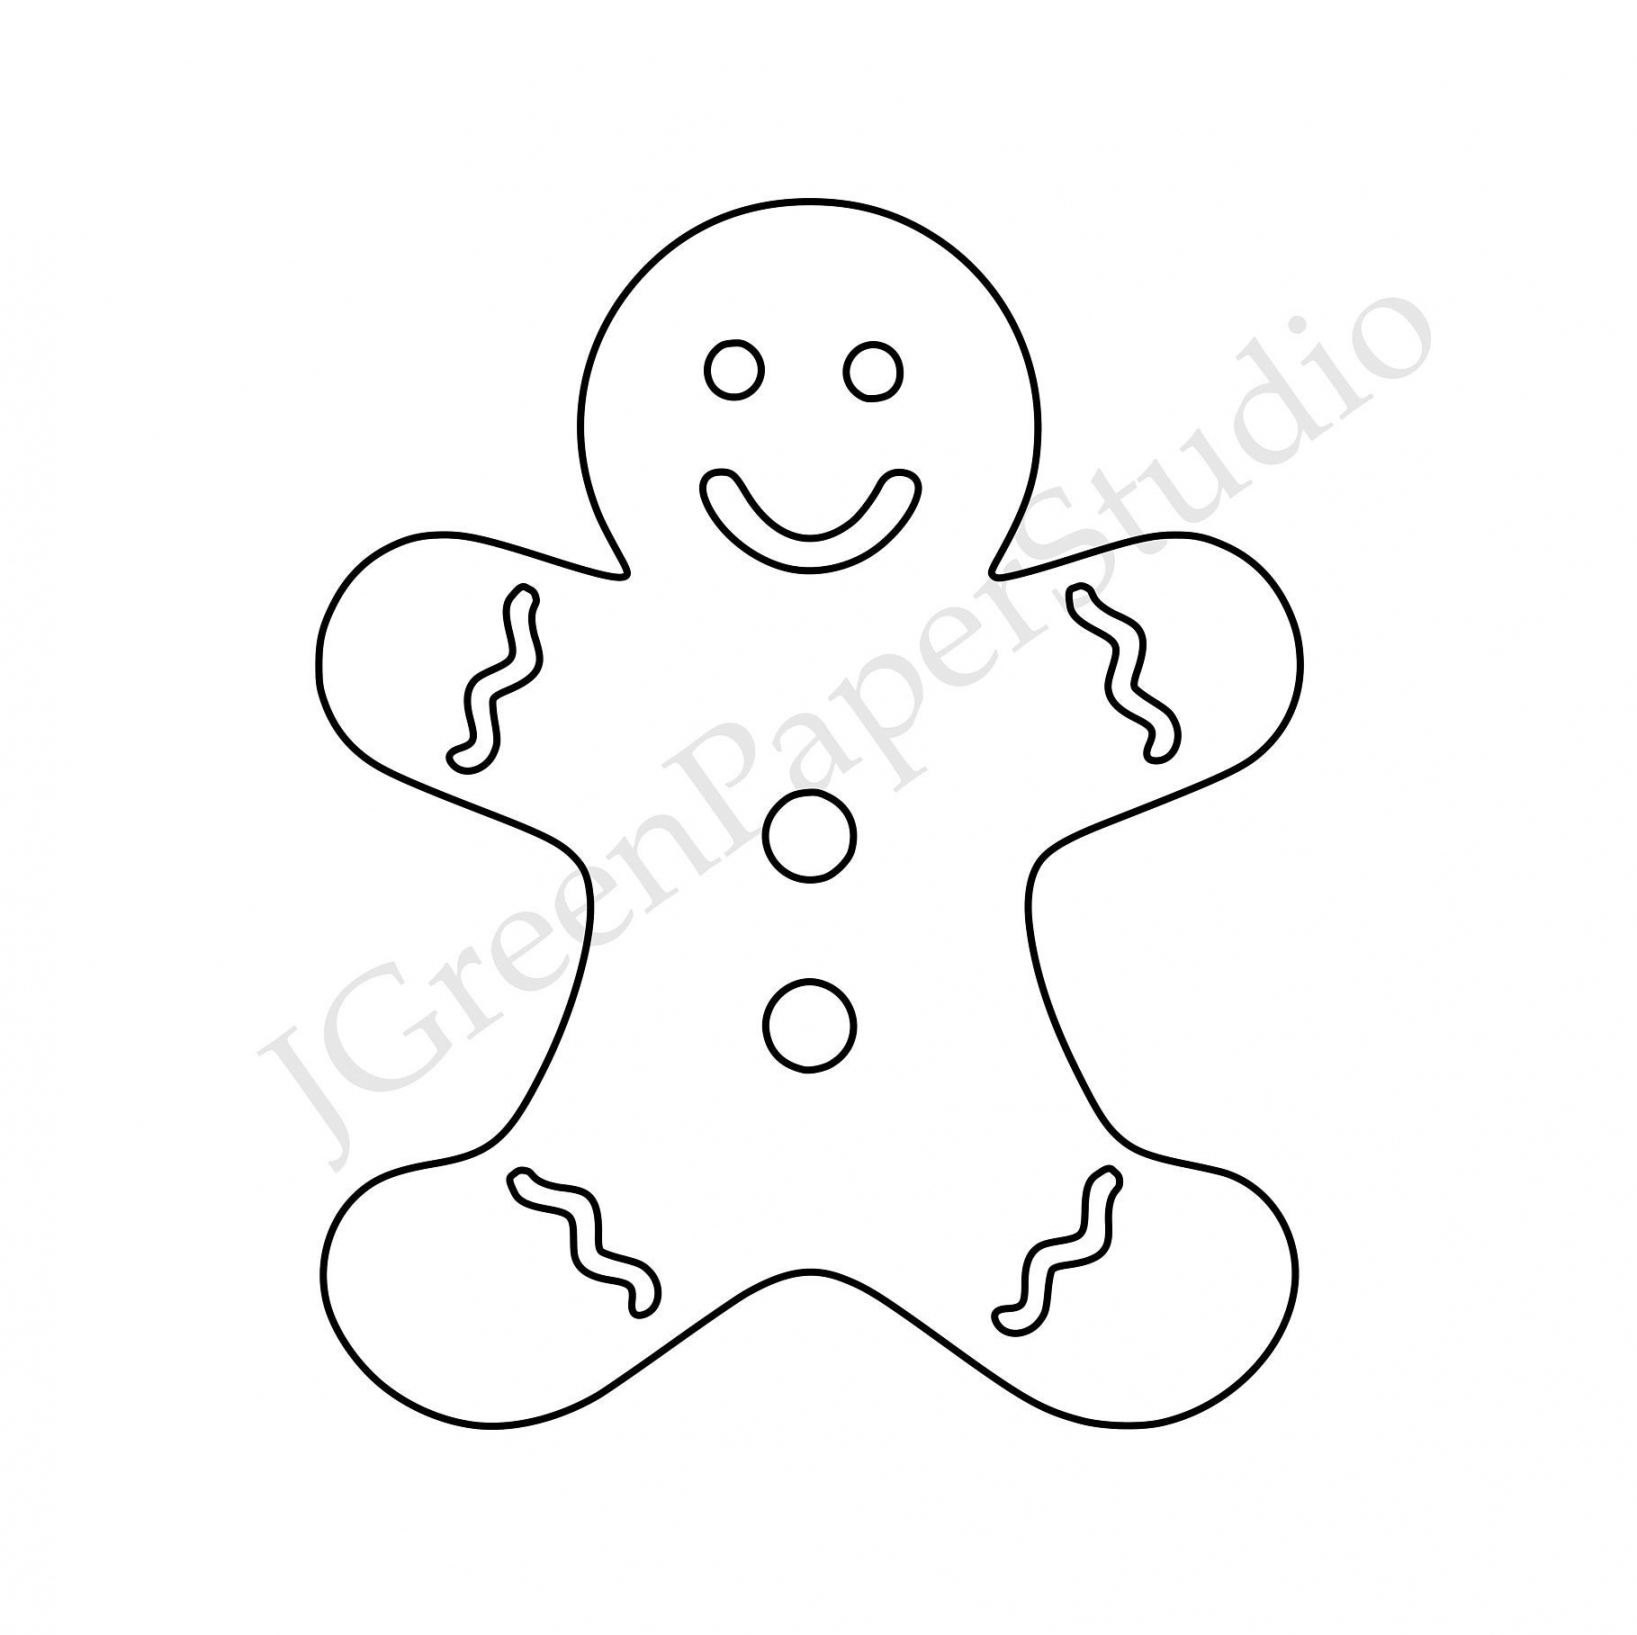 Printable Gingerbread Man Template-PDF Digital Download Cookie Kids Holiday  Coloring Page Kids Craft Stencil -inch Gingerbread Scrapbooking - FREE Printables - Gingerbread Man Cutout